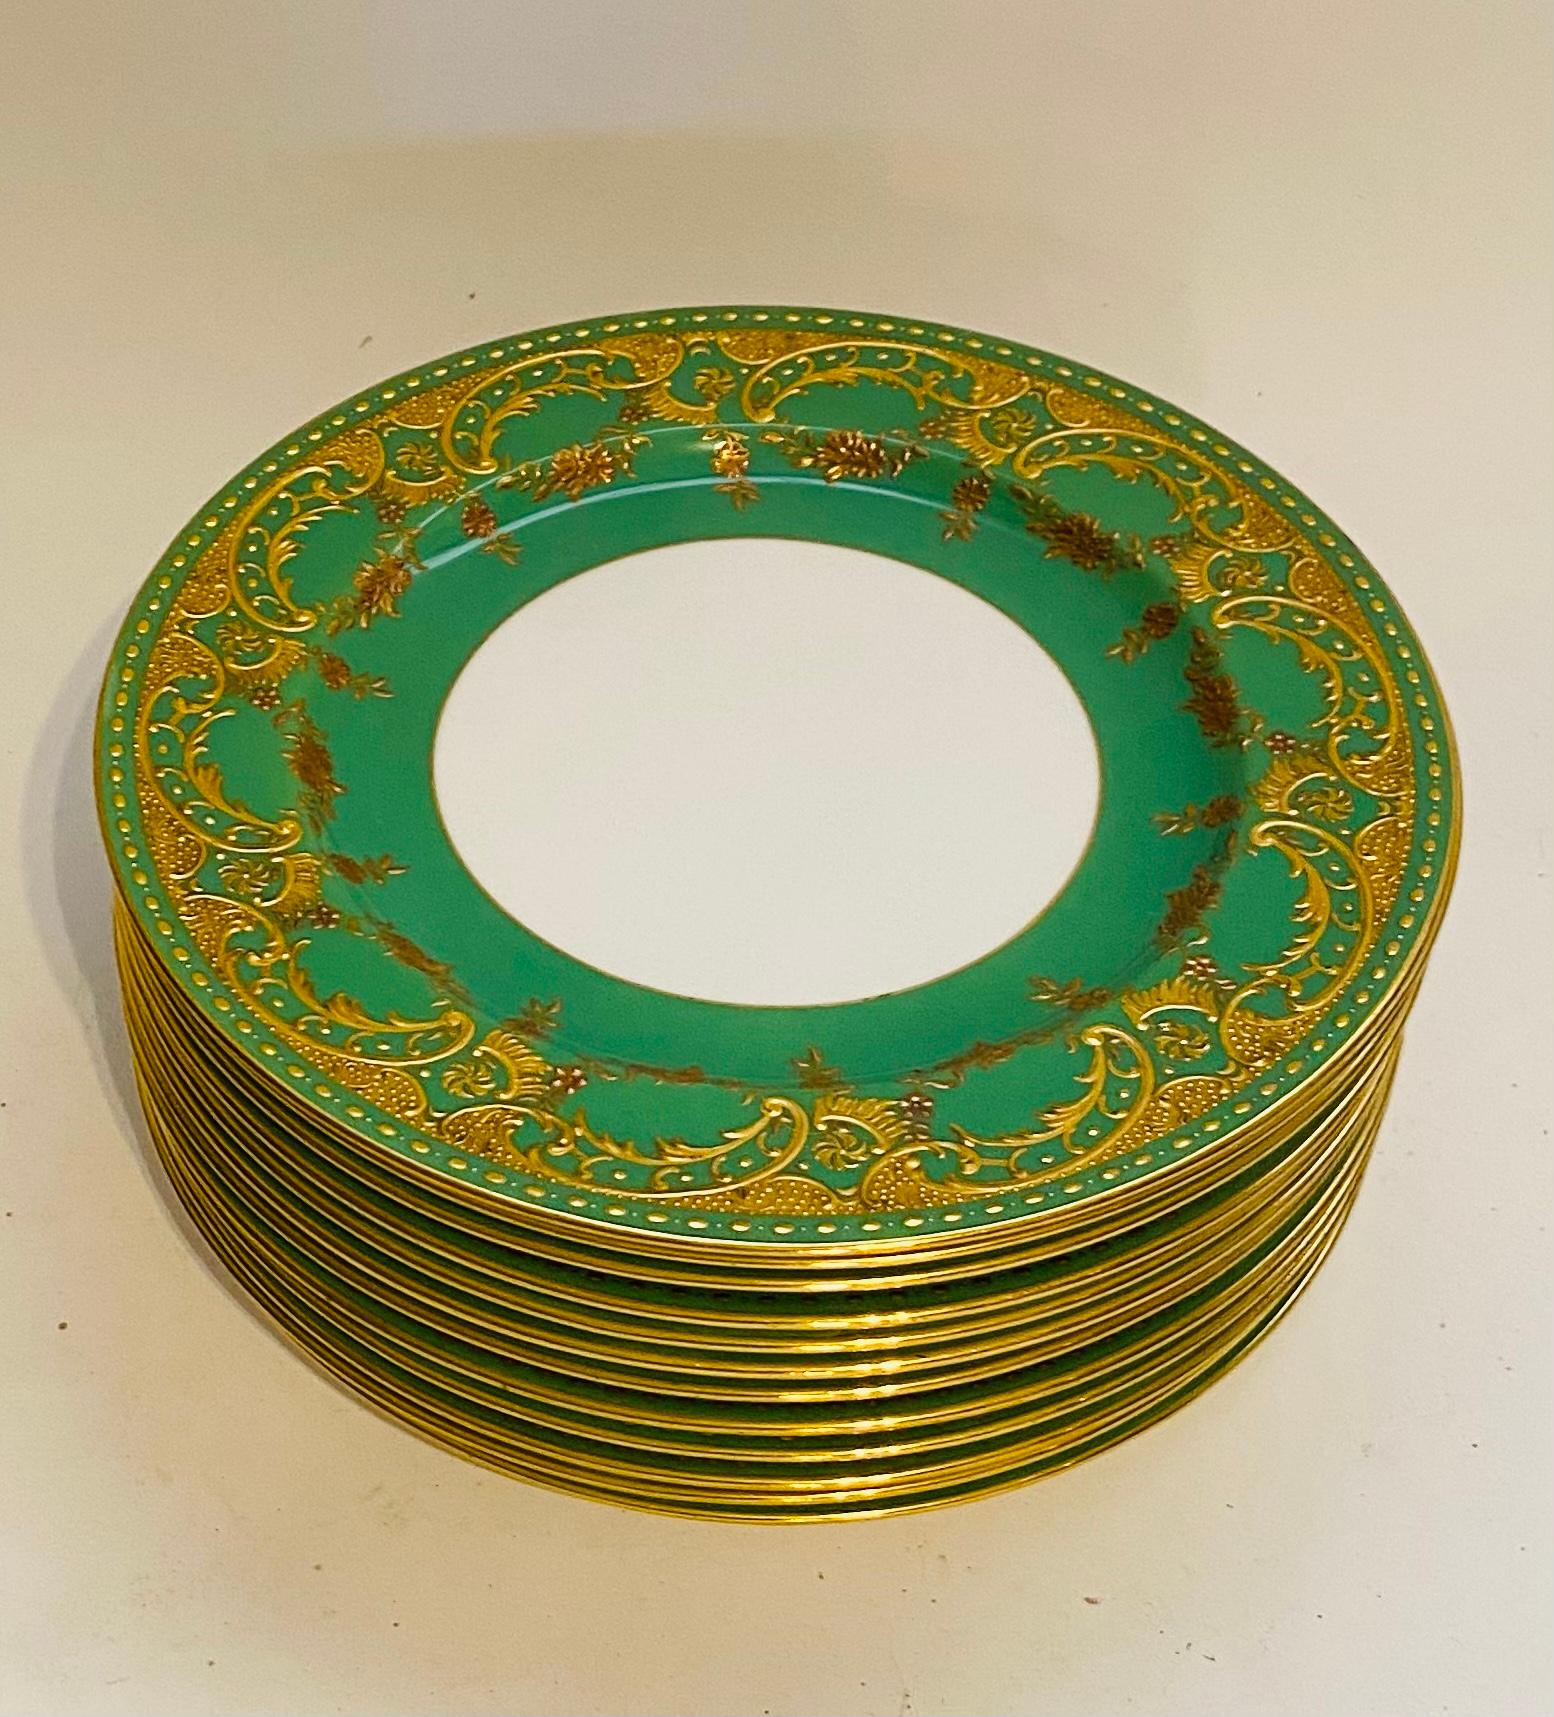 British 12 Heavily Gilt Encrusted Antique Green & Gold Minton England Dinner Plates For Sale